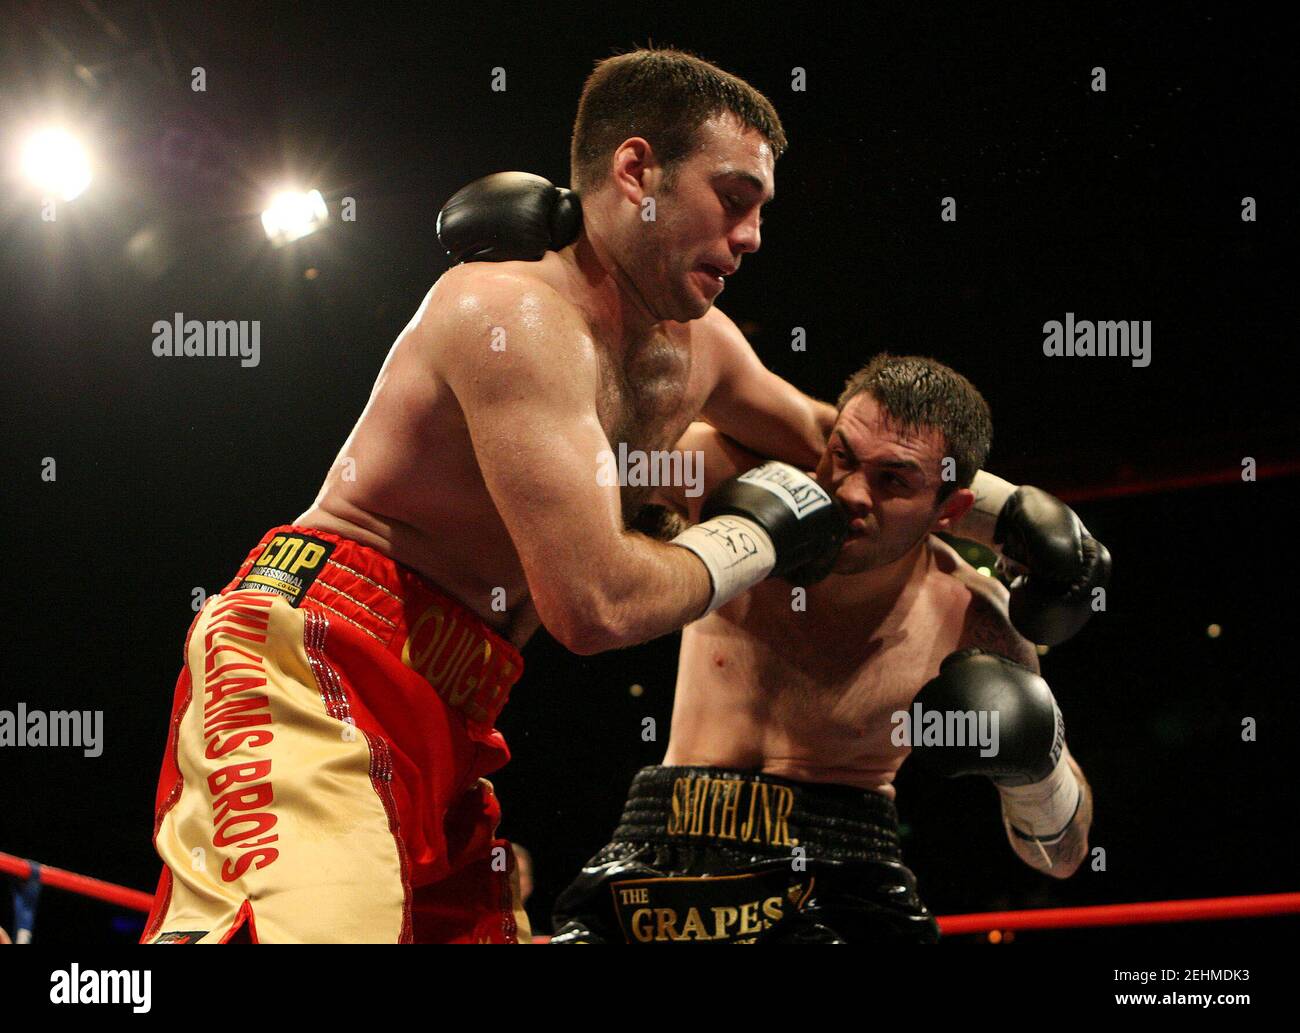 Tony quigley v paul smith hi-res stock photography and images - Page 2 -  Alamy